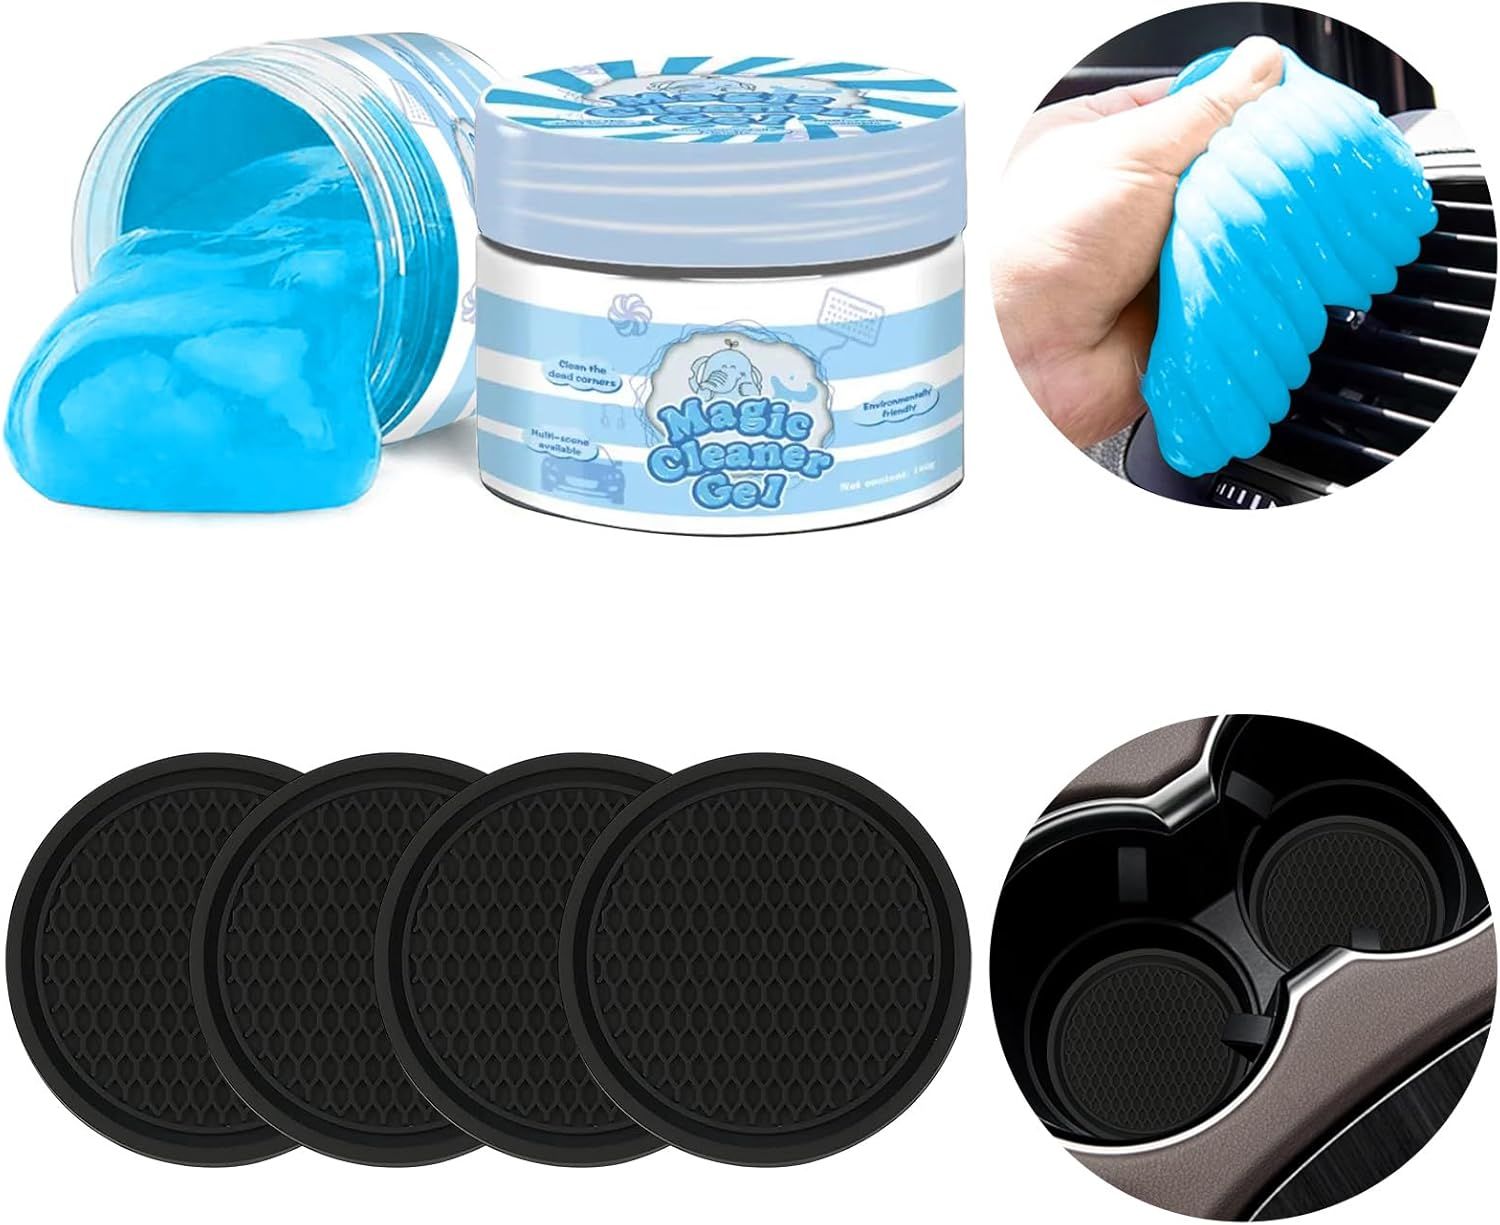 yesrock 2-in-1 (Car Cleaning Gel for Car Detailing) and (4 Pack of 2.8-inch Car Coasters for Cup ... | Amazon (US)